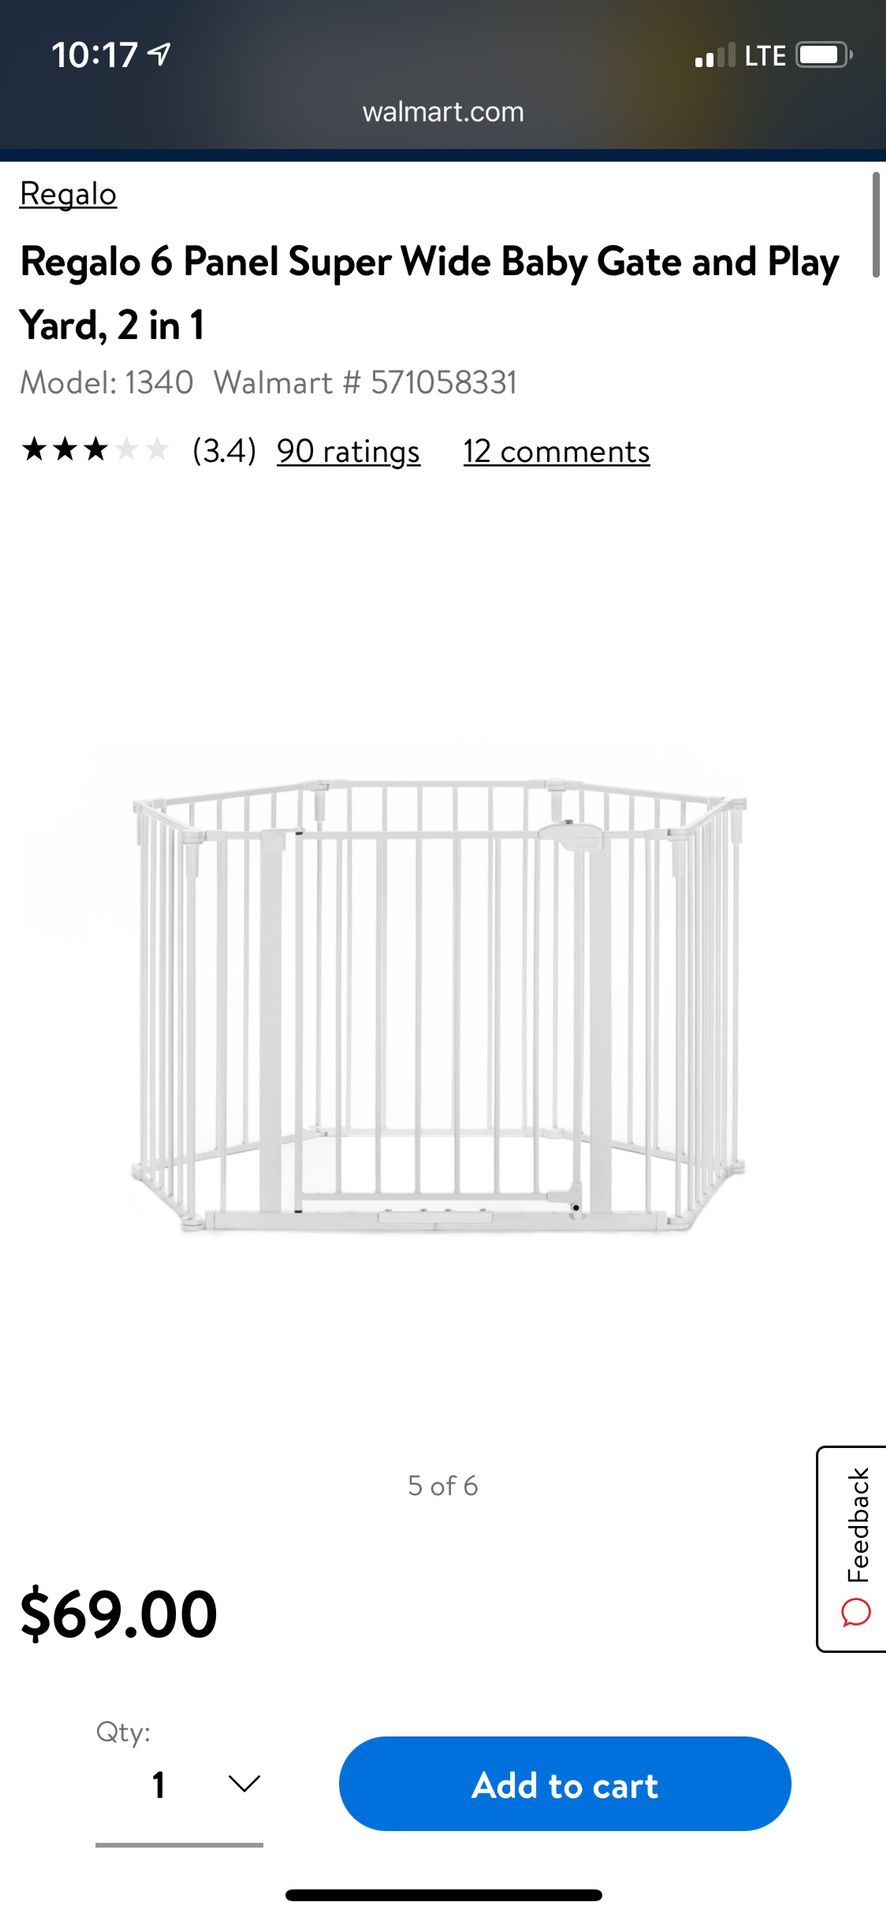 2 Extra large baby gate/play area in one